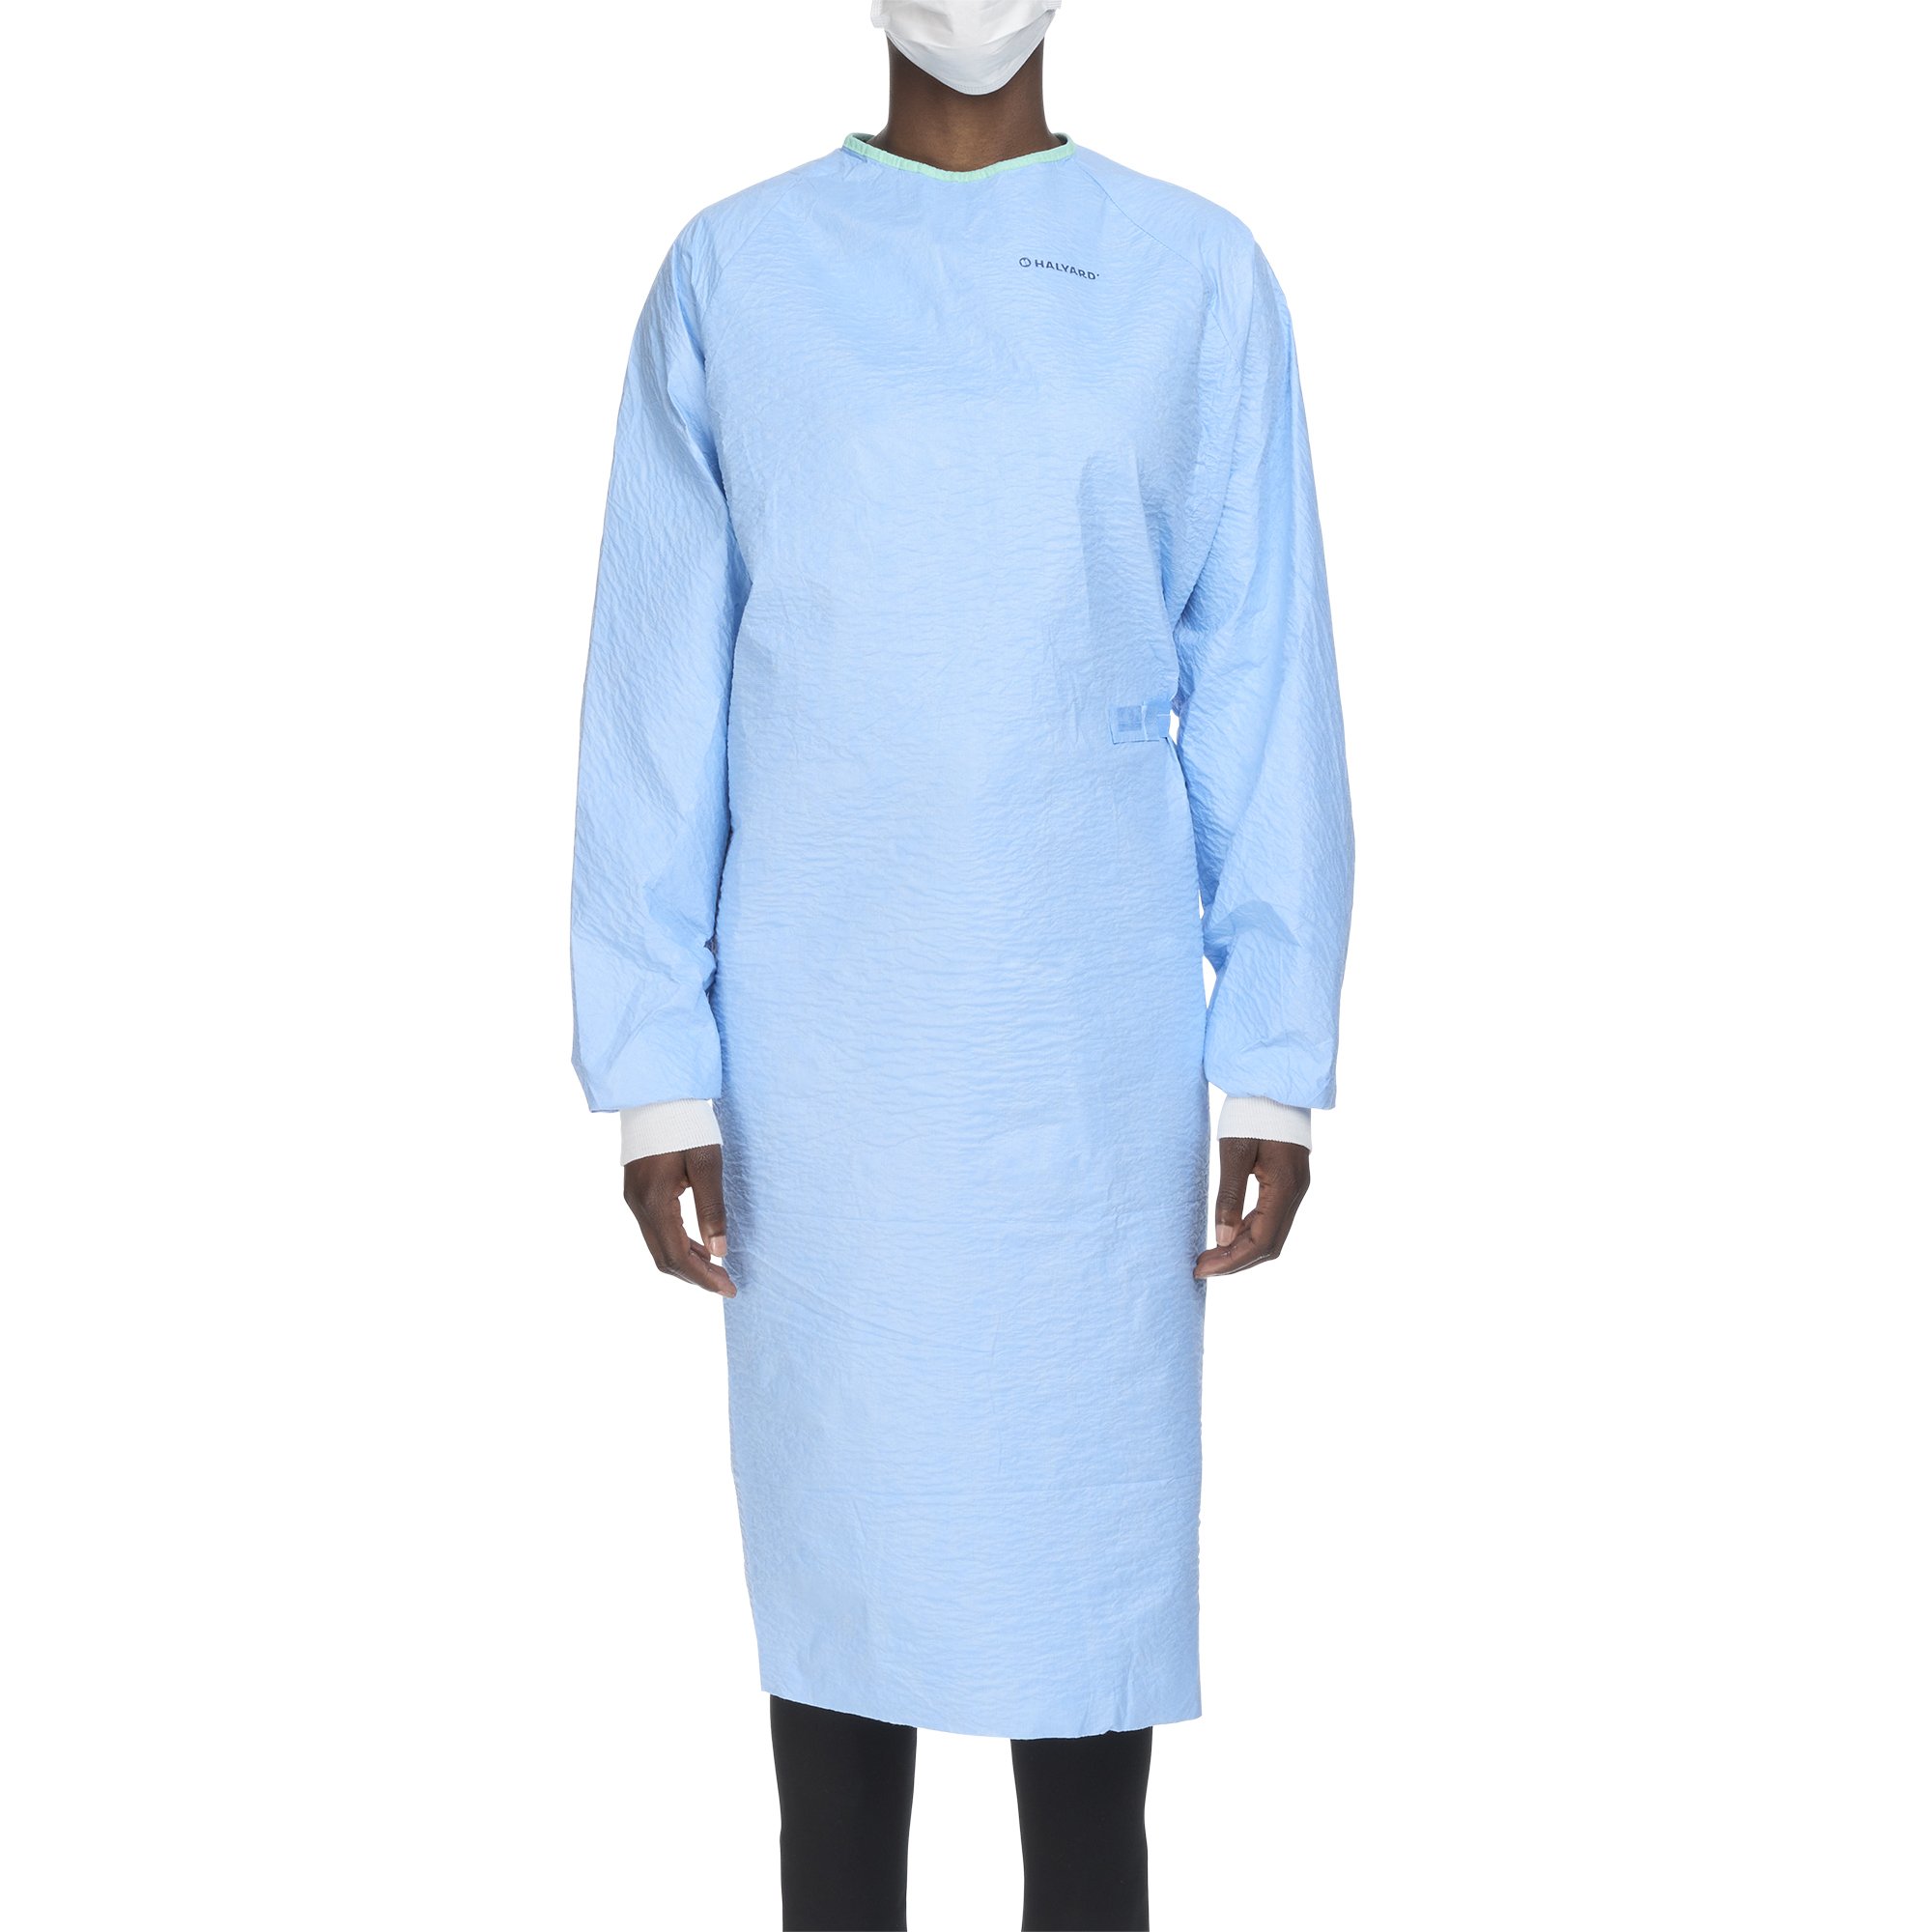 AERO BLUE Surgical Gown with Towel, Large MK 938744